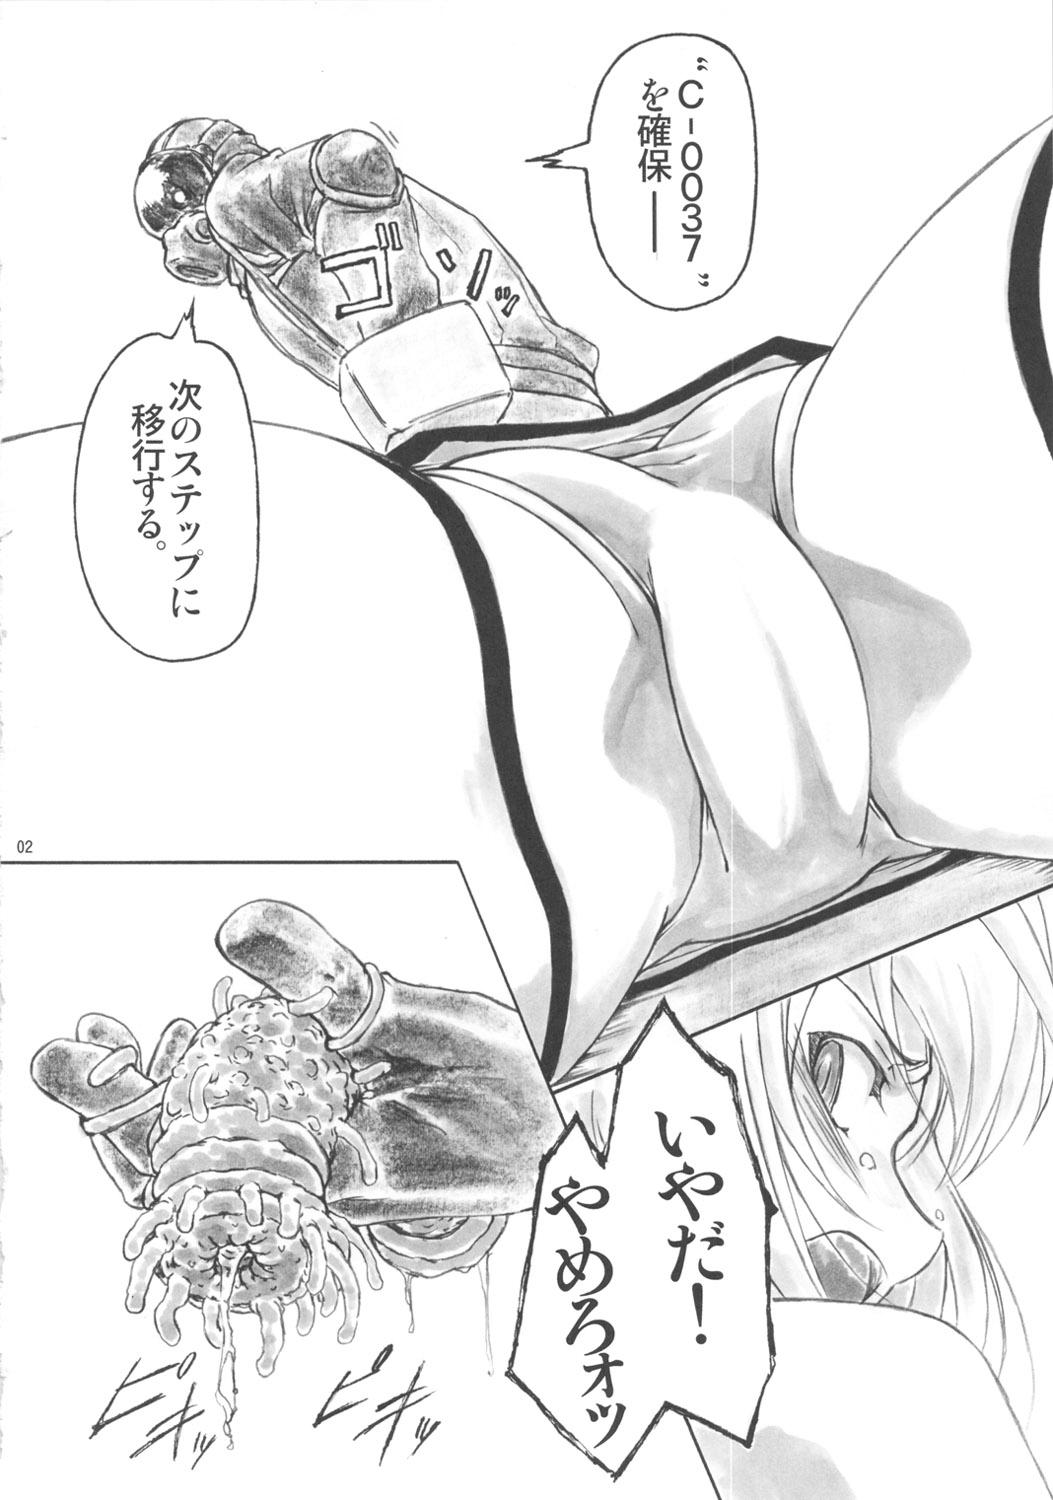 Best Blowjobs Angel's stroke 57 Infinite Laura! - Infinite stratos Maid - Page 3